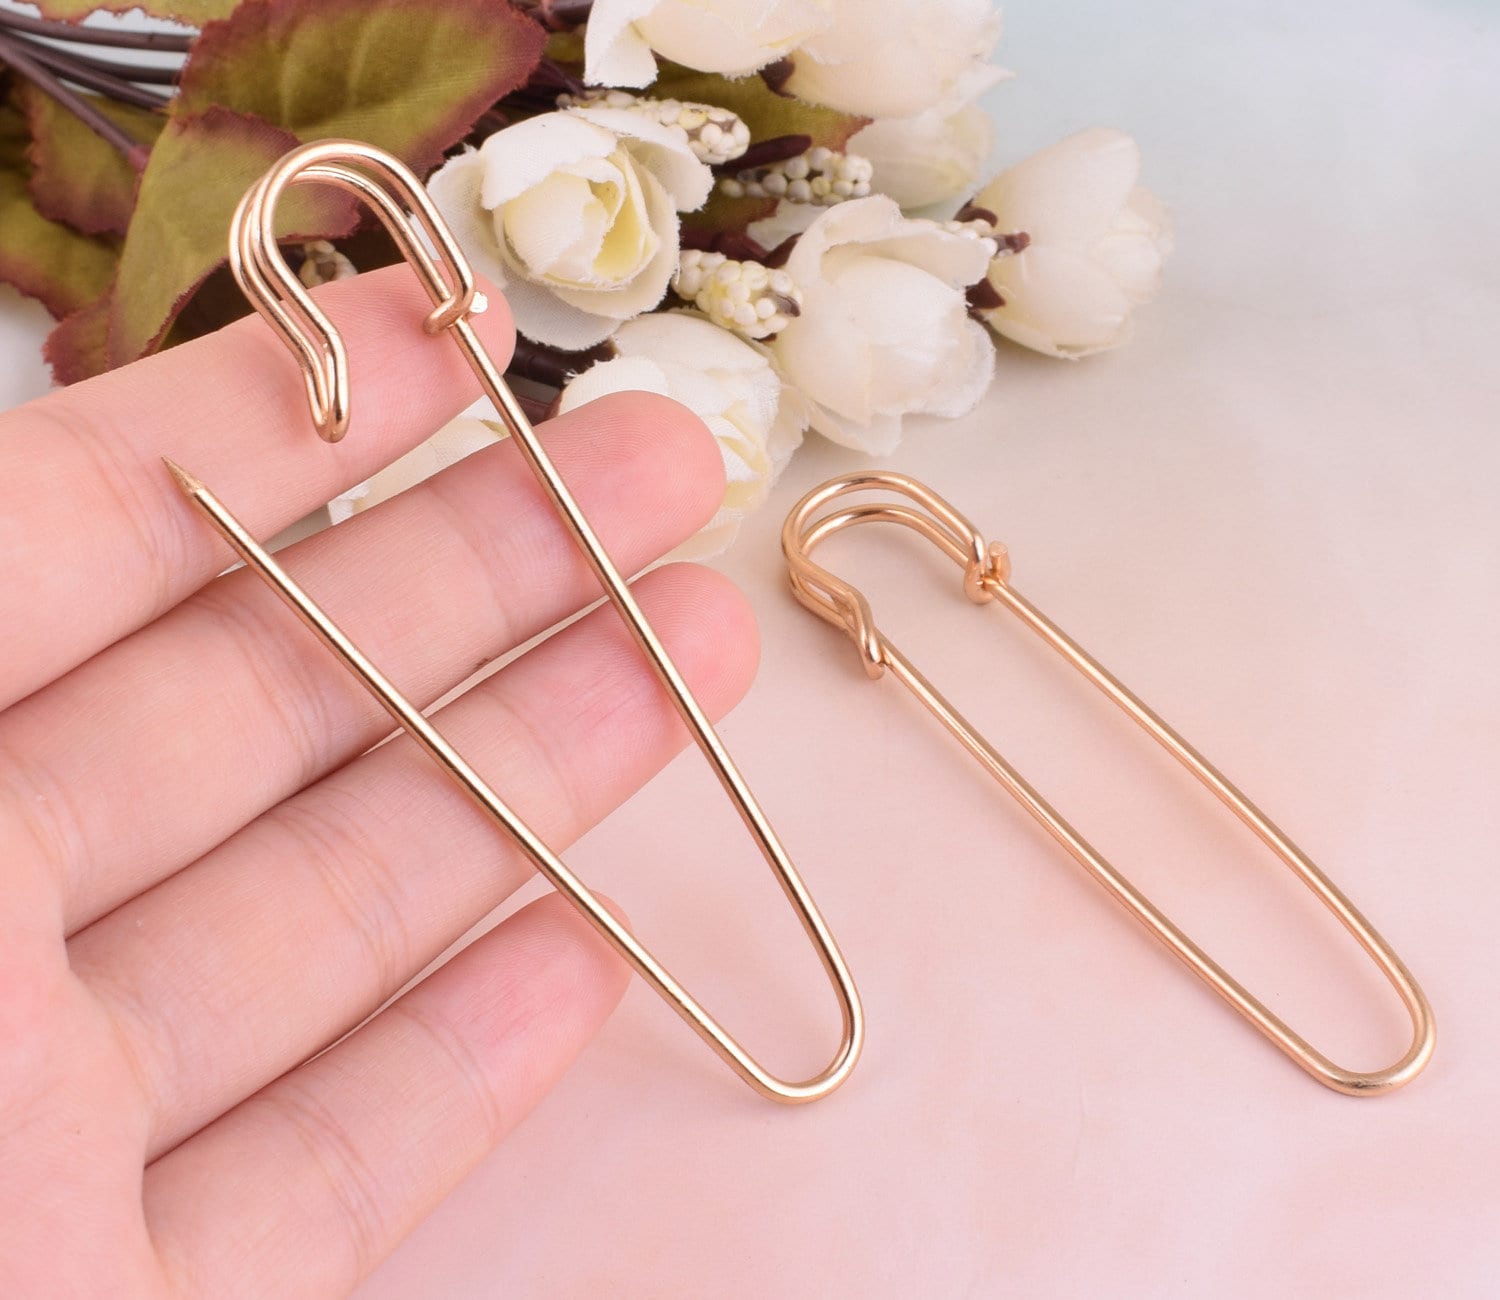 10 PCS Large Rose Gold/silver/gold Safety Pins,80mm Craft Safety